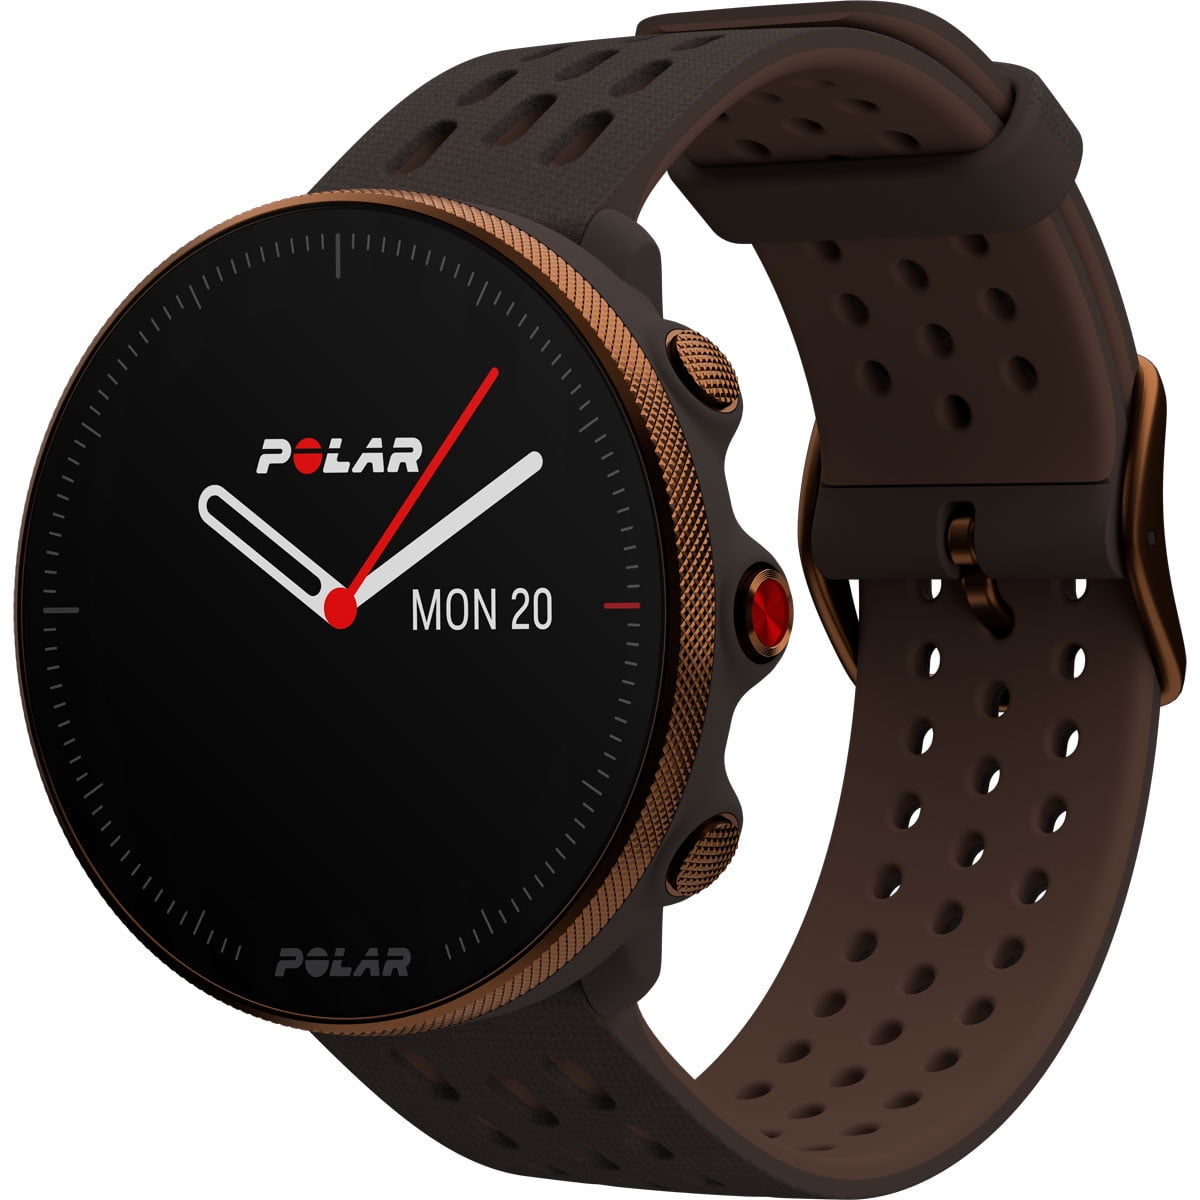 Polar Vantage M2 review: sport in style - Wareable